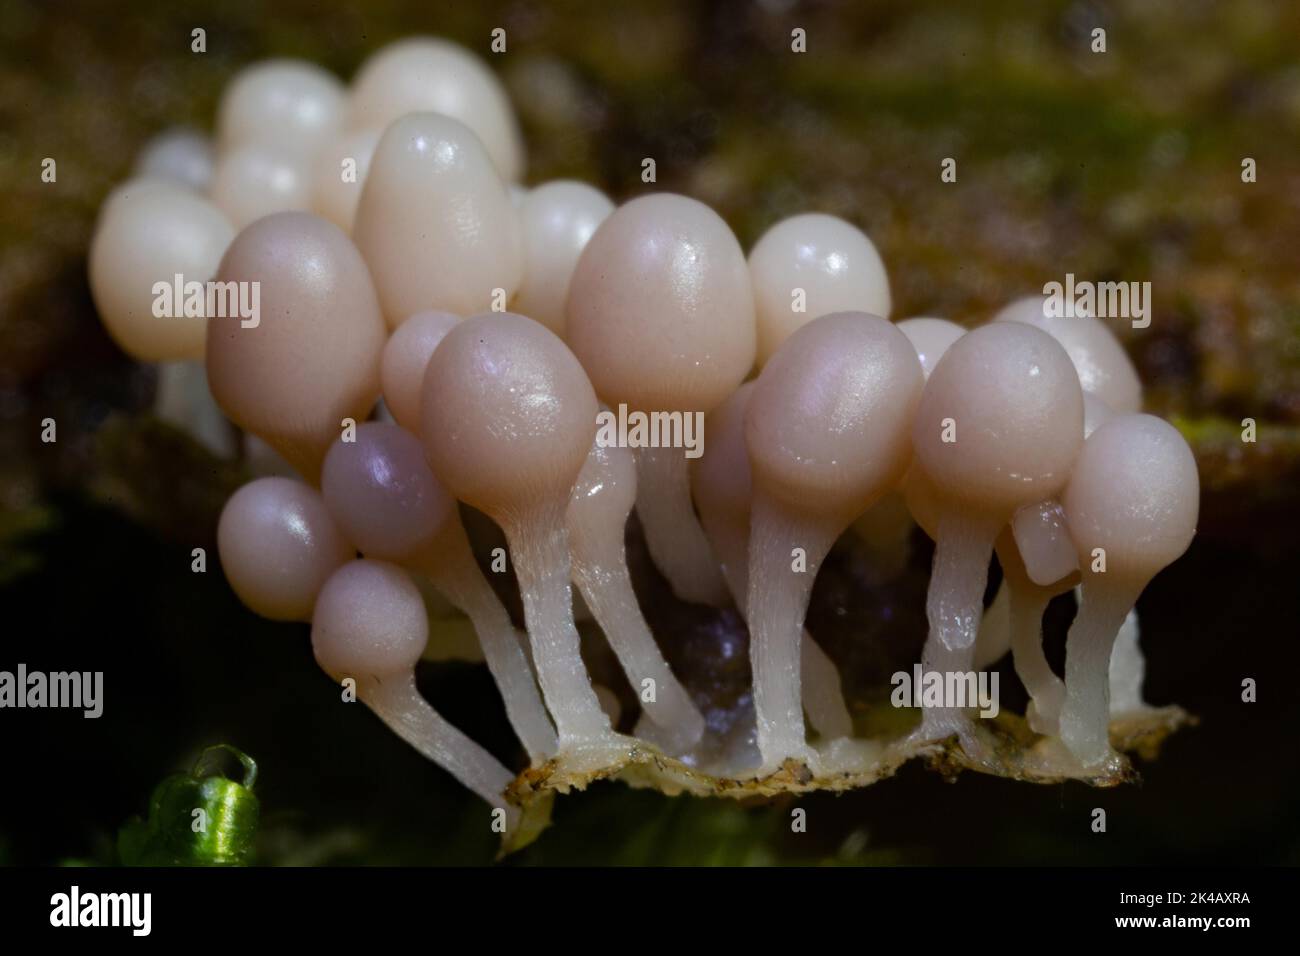 Red-headed slime mould some fruiting bodies with old pink stems and spherical hips next to each other on tree trunk Stock Photo